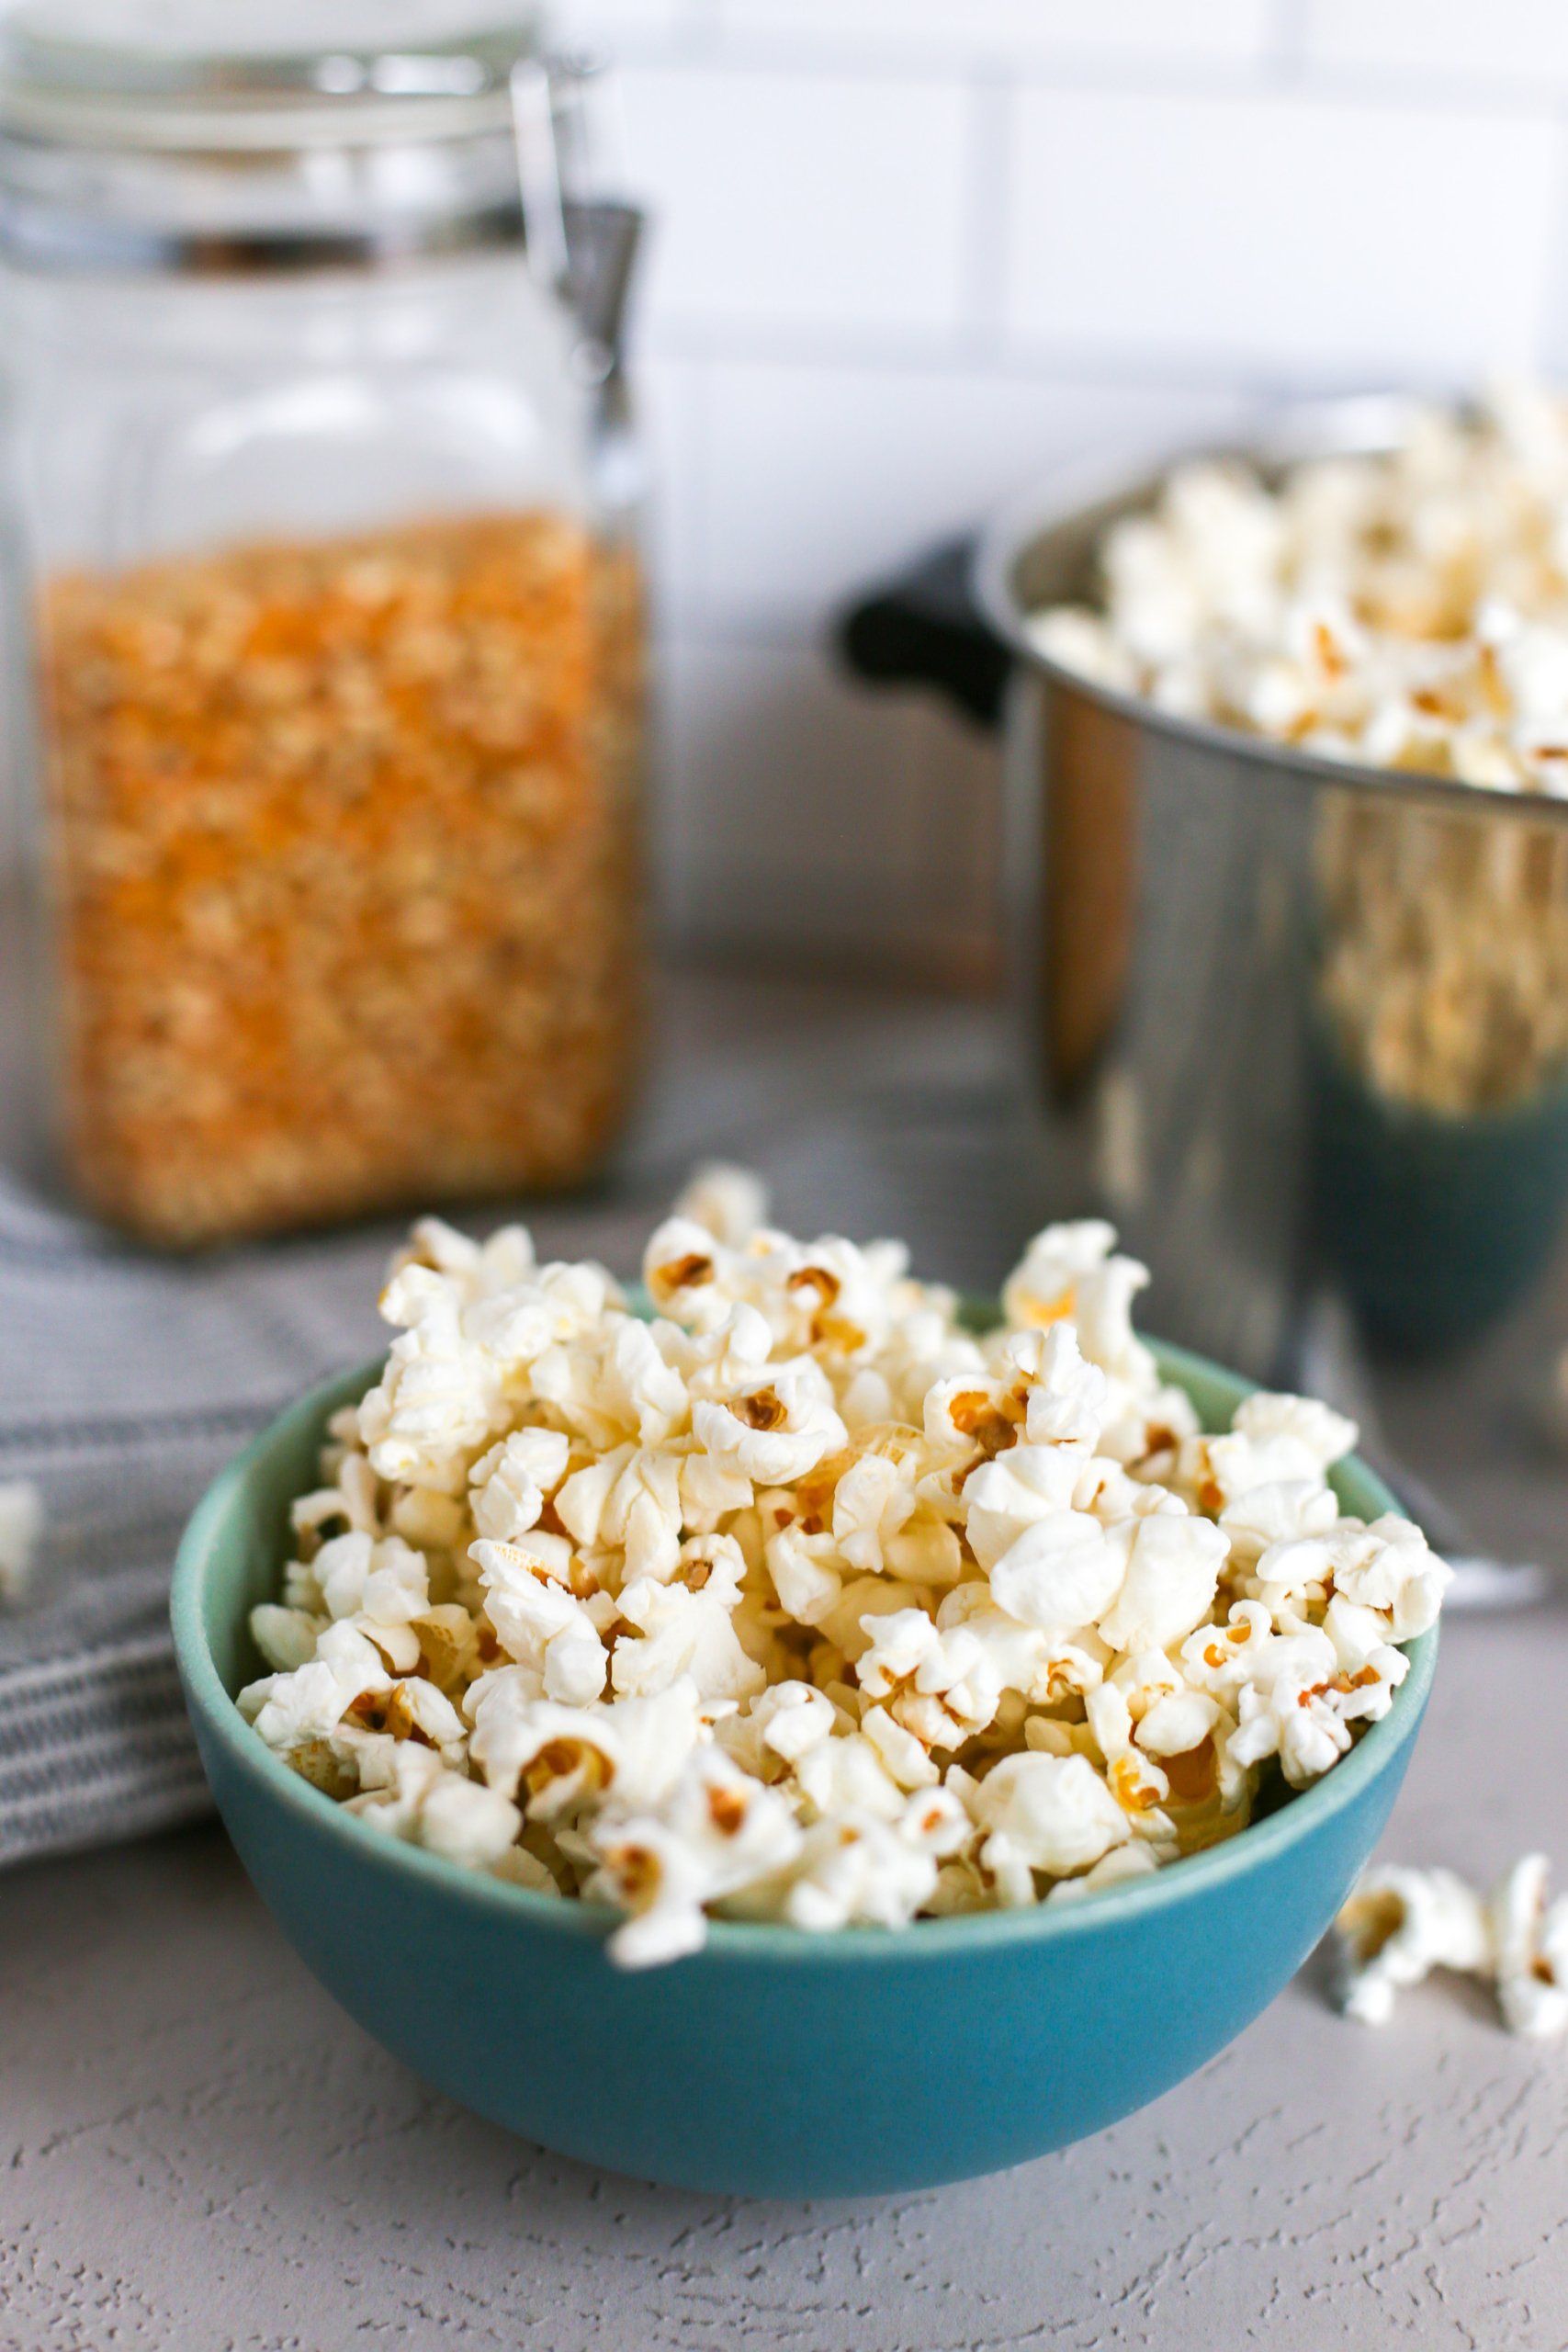 Homemade coconut oil popcorn in a blue bowl with a pot of more popcorn behind it.